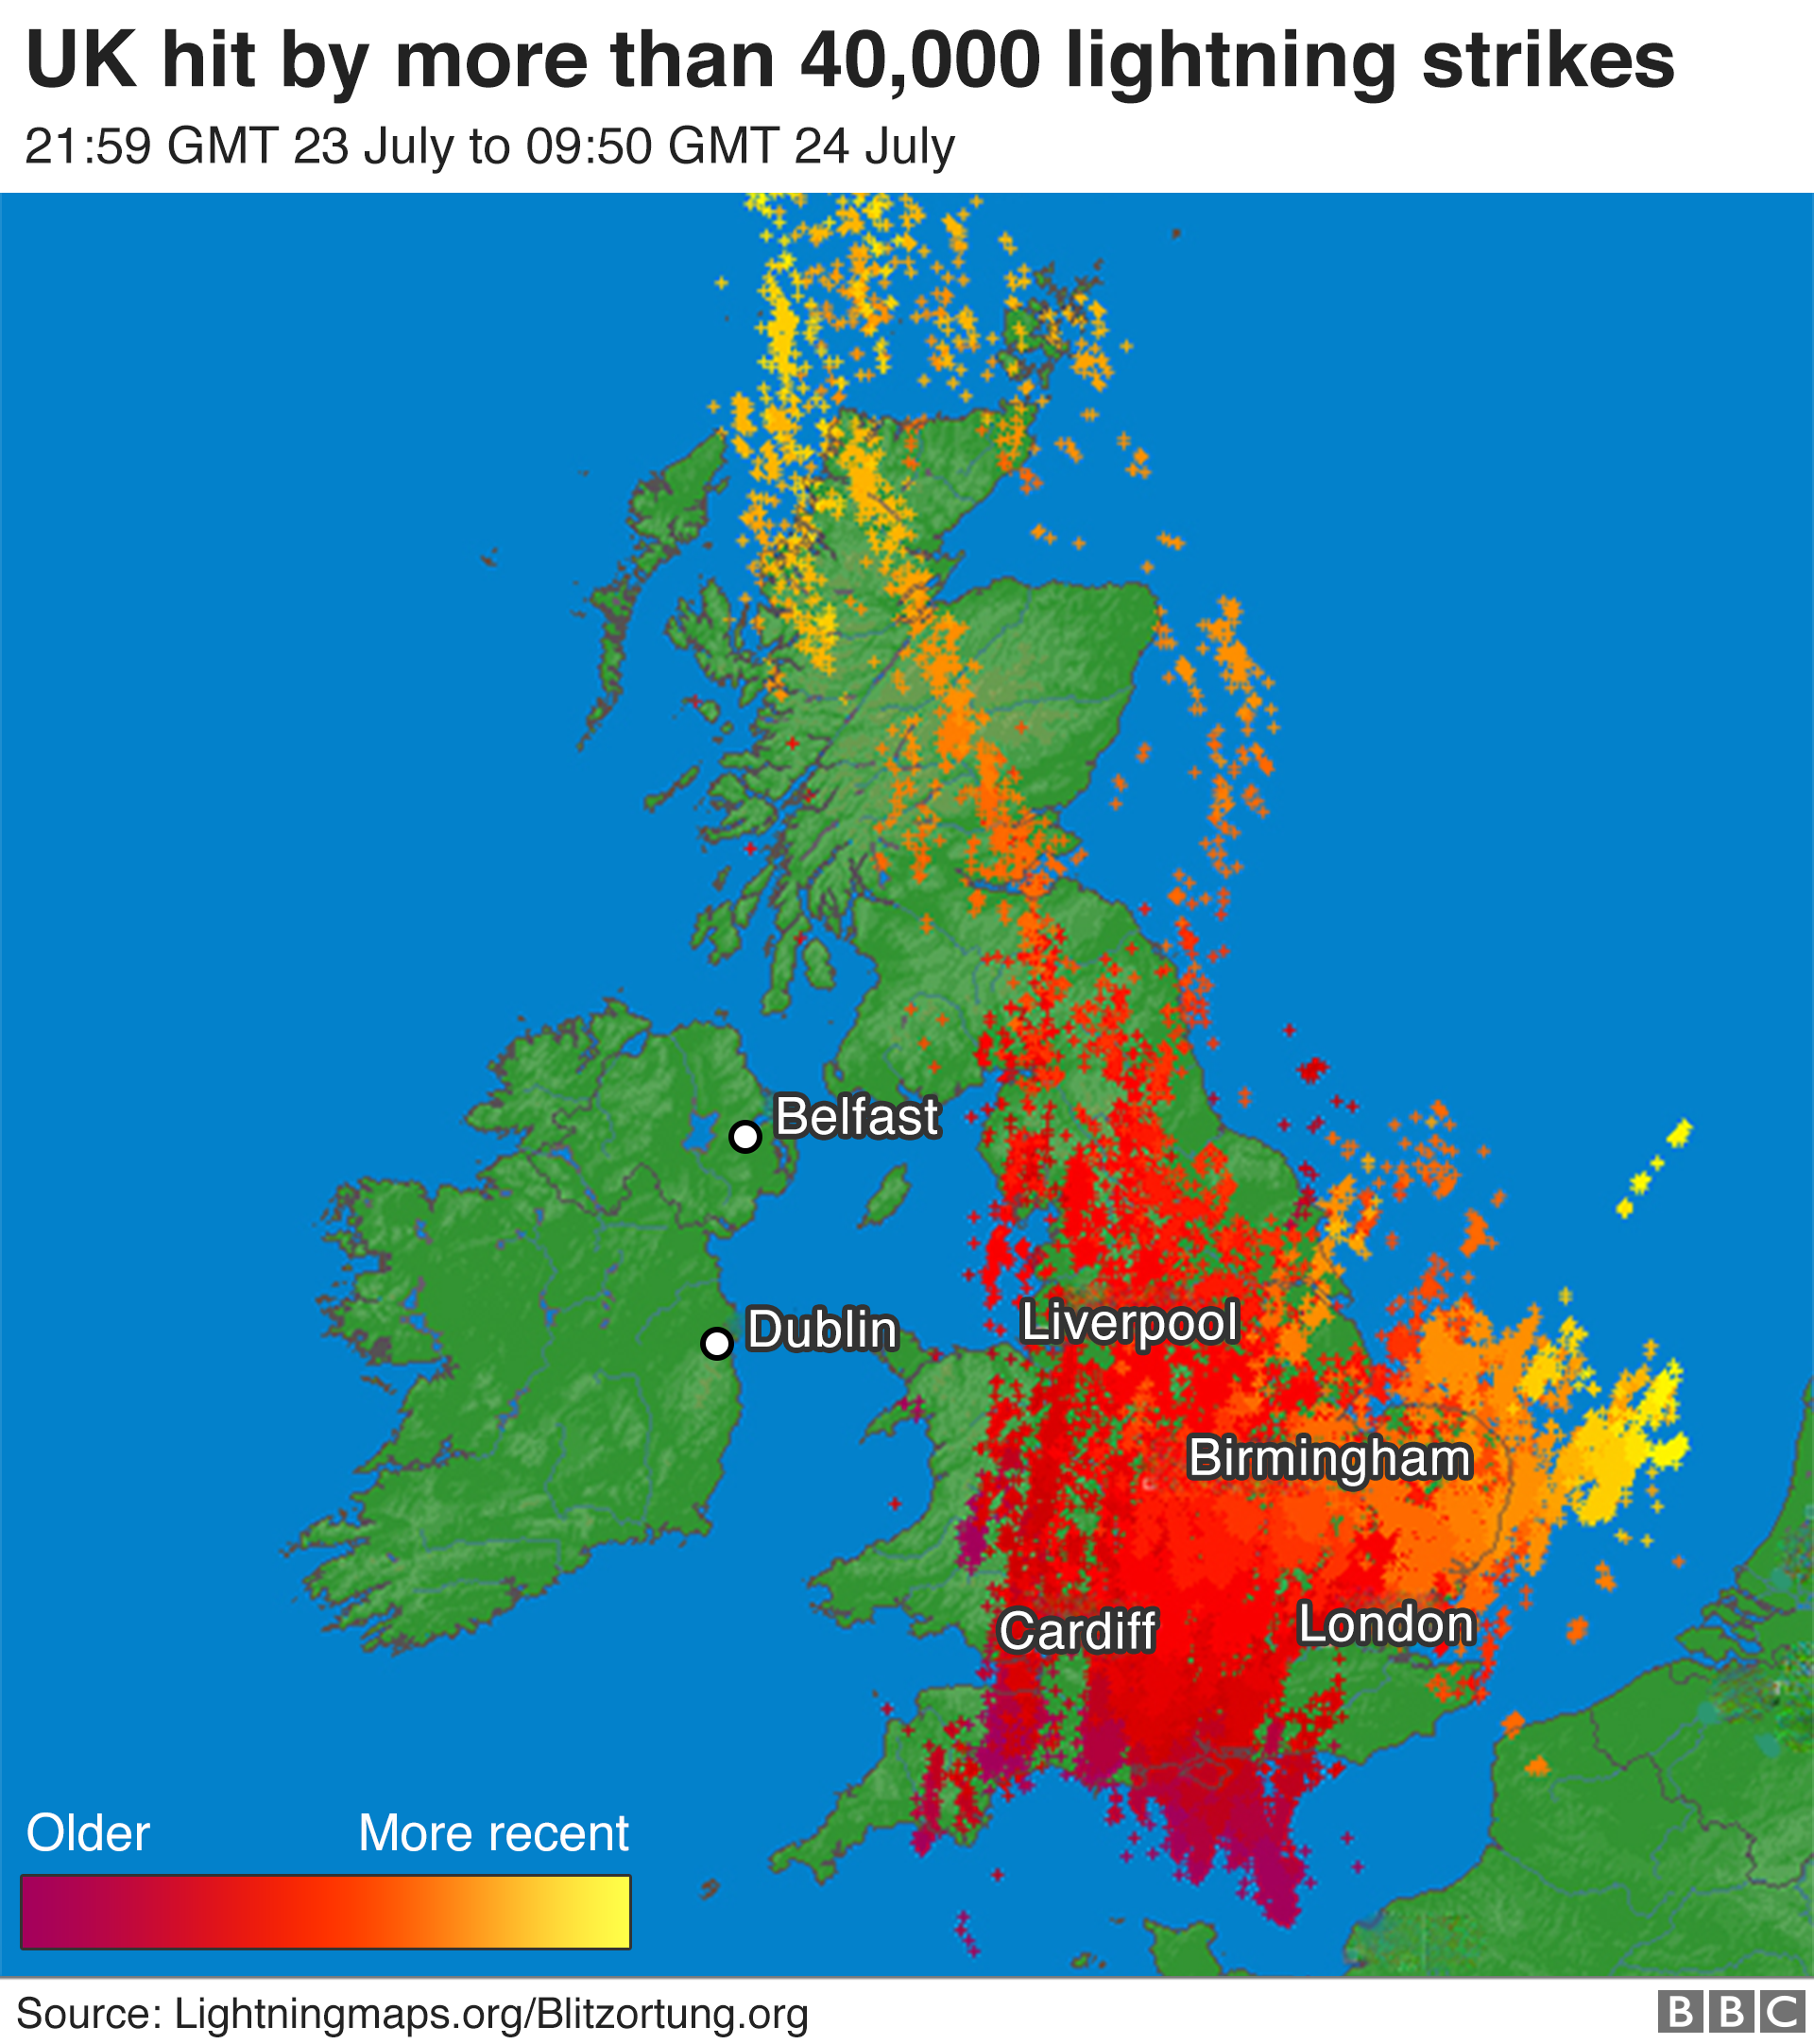 Lightning strikes hitting the UK in a 12 hour period